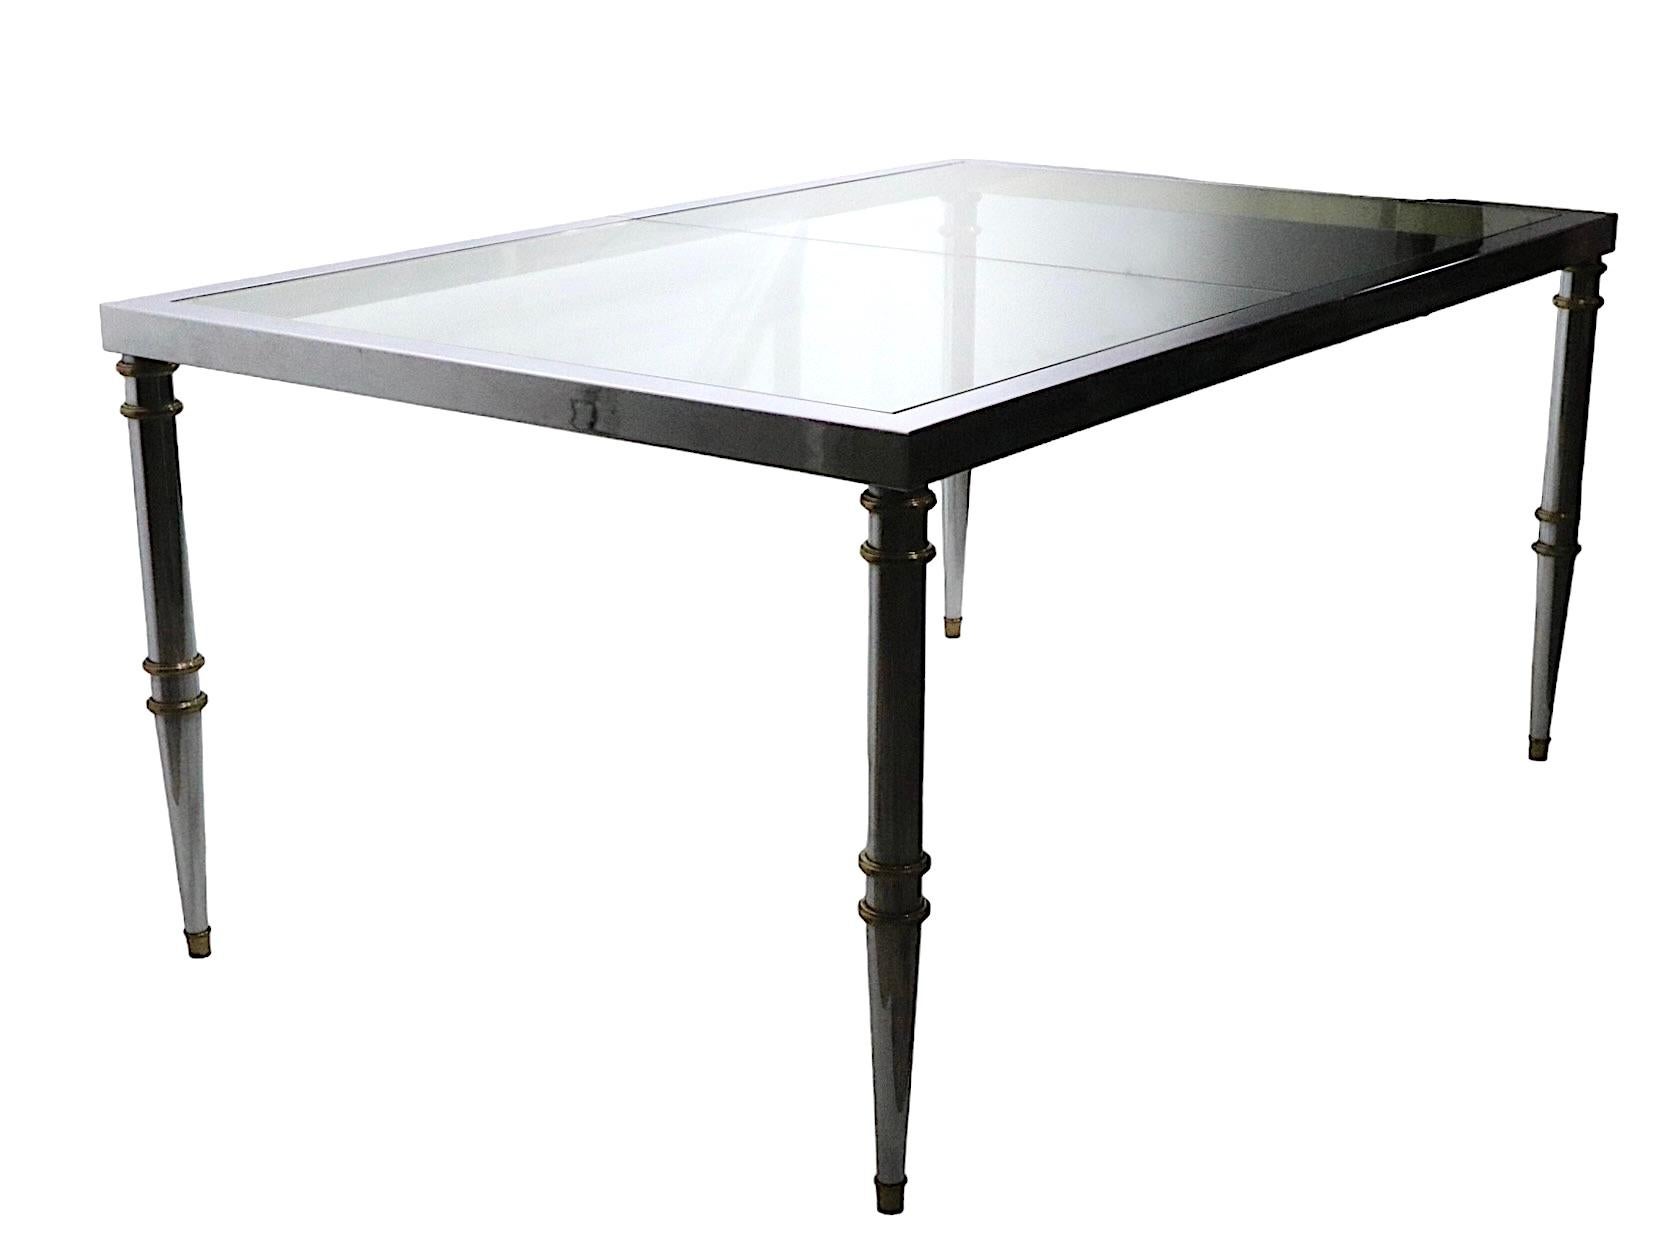 Hollywood Regency Steel and Brass Dining Table Made in Italy circa 1970s After Maison Jansen  For Sale